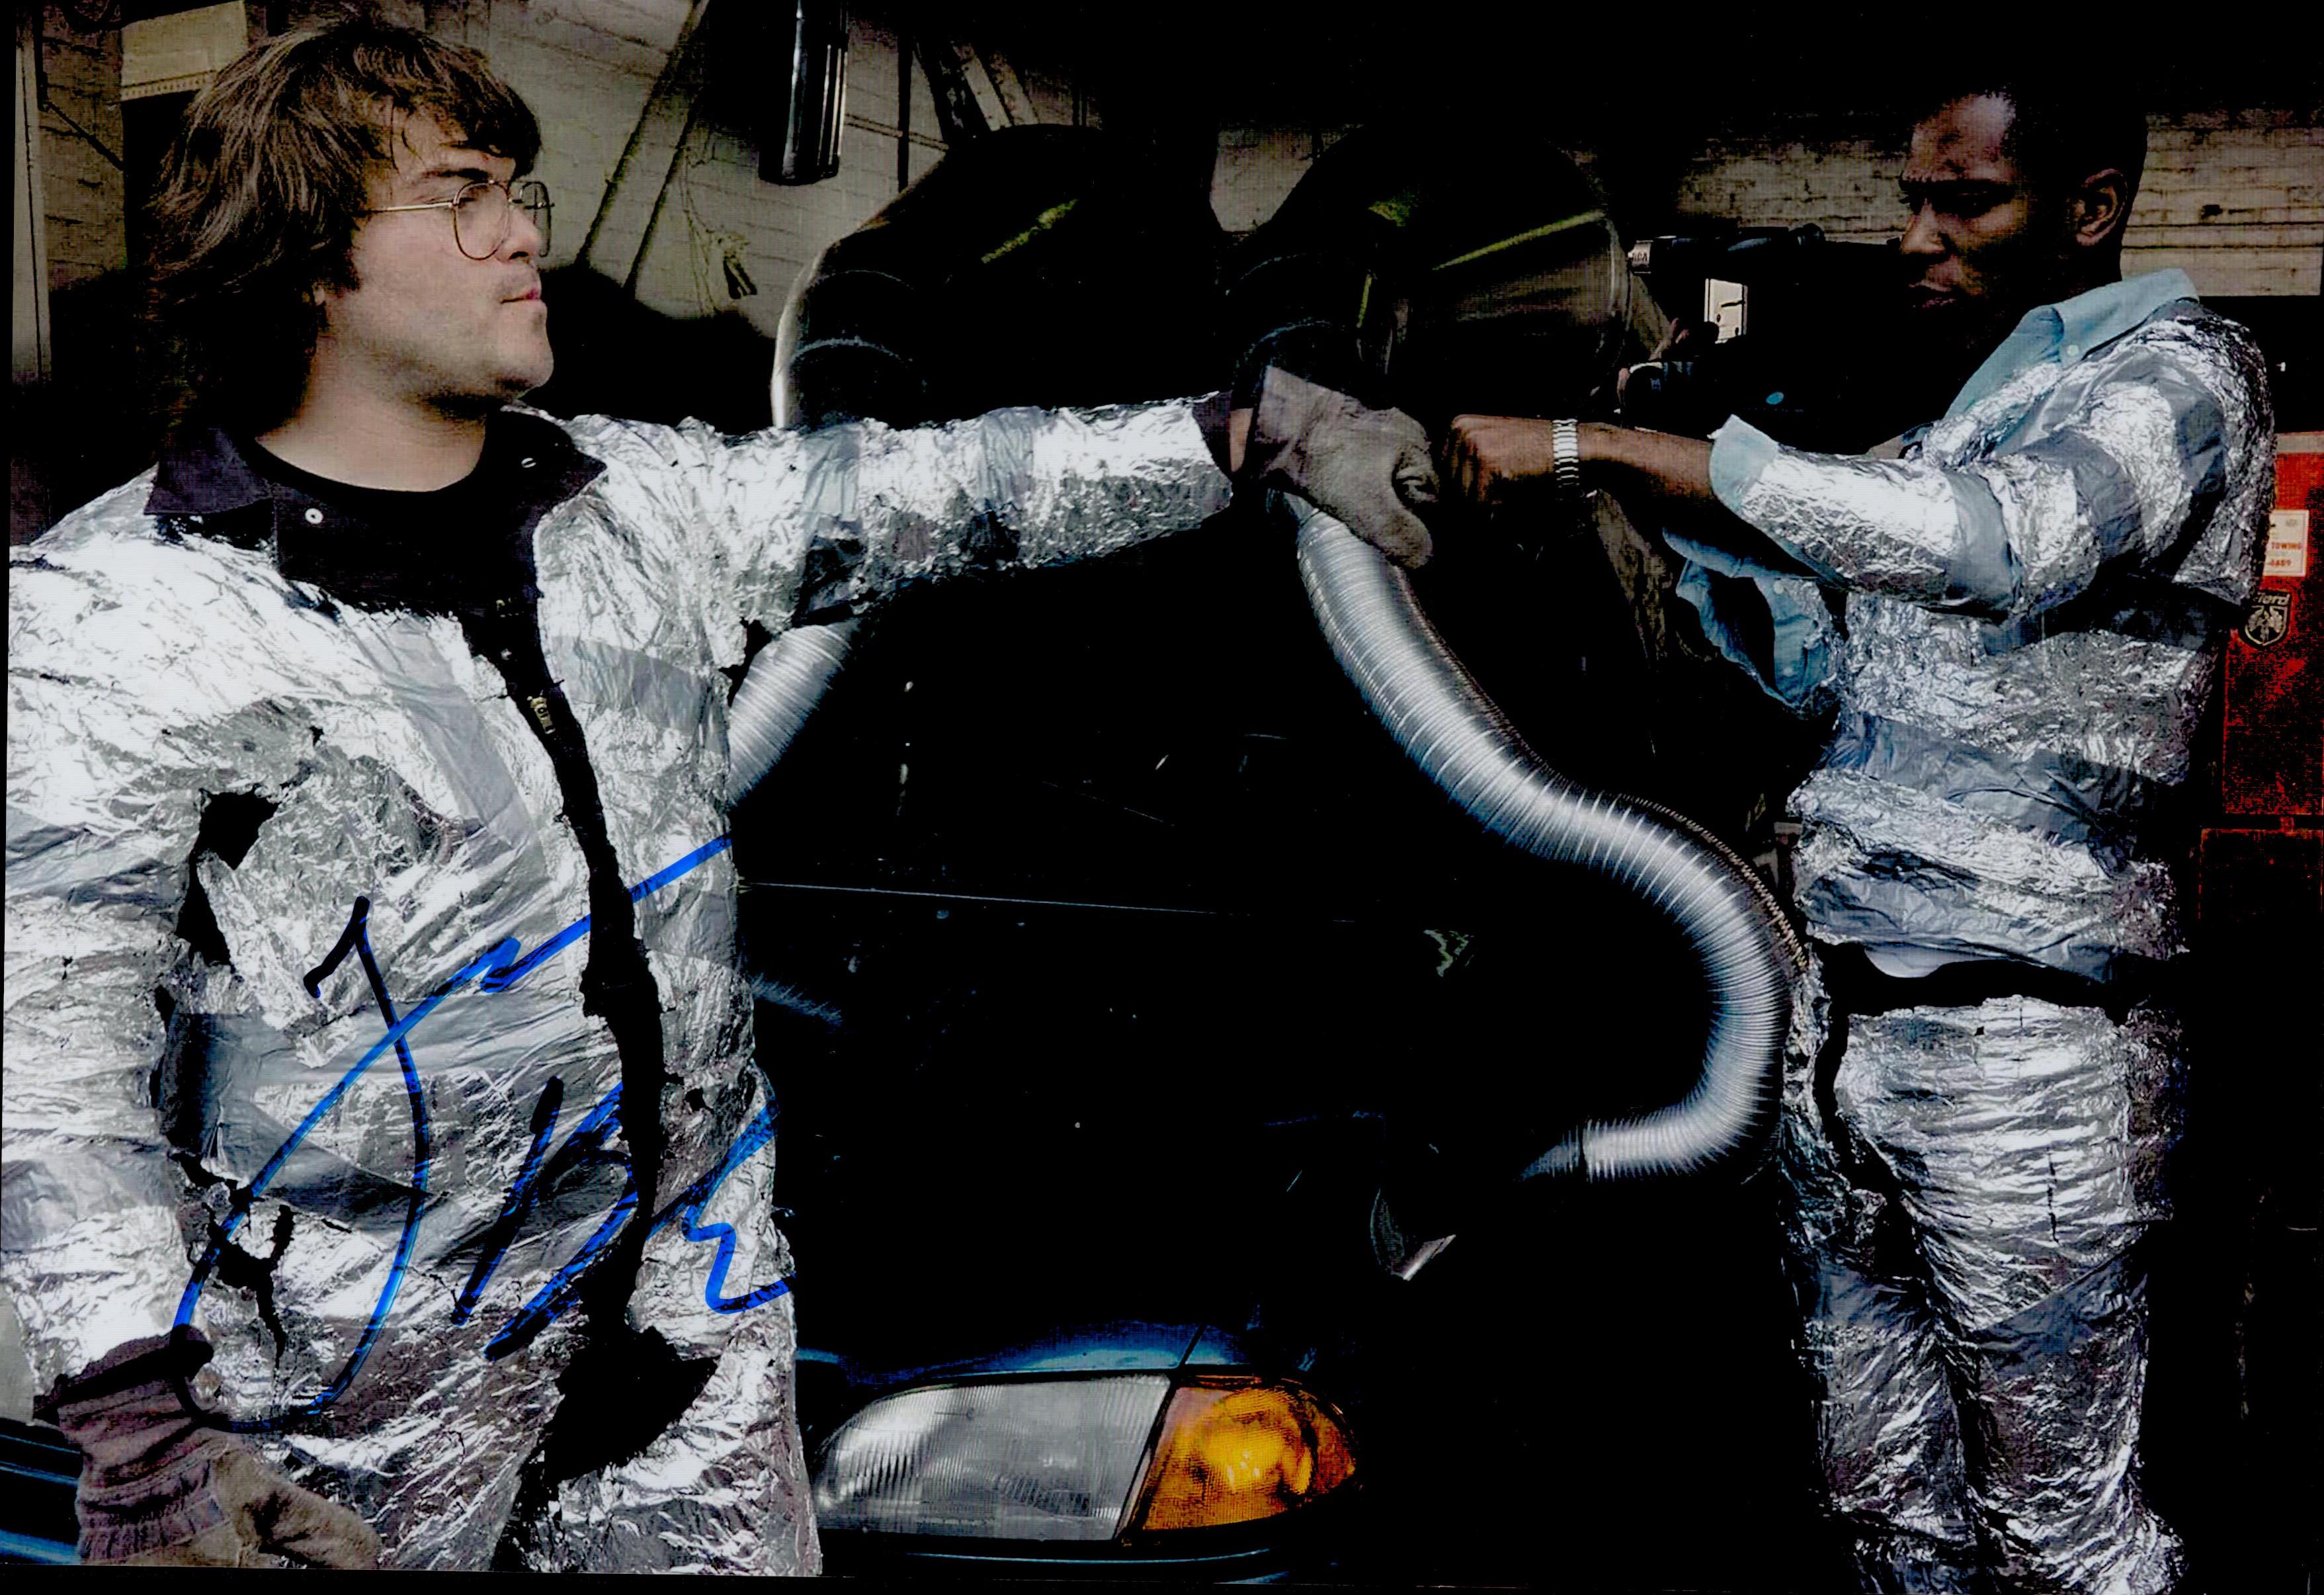 Jack Black Signed 12x8 inch Colour Photo. Signed in blue ink. Good condition. All autographs come